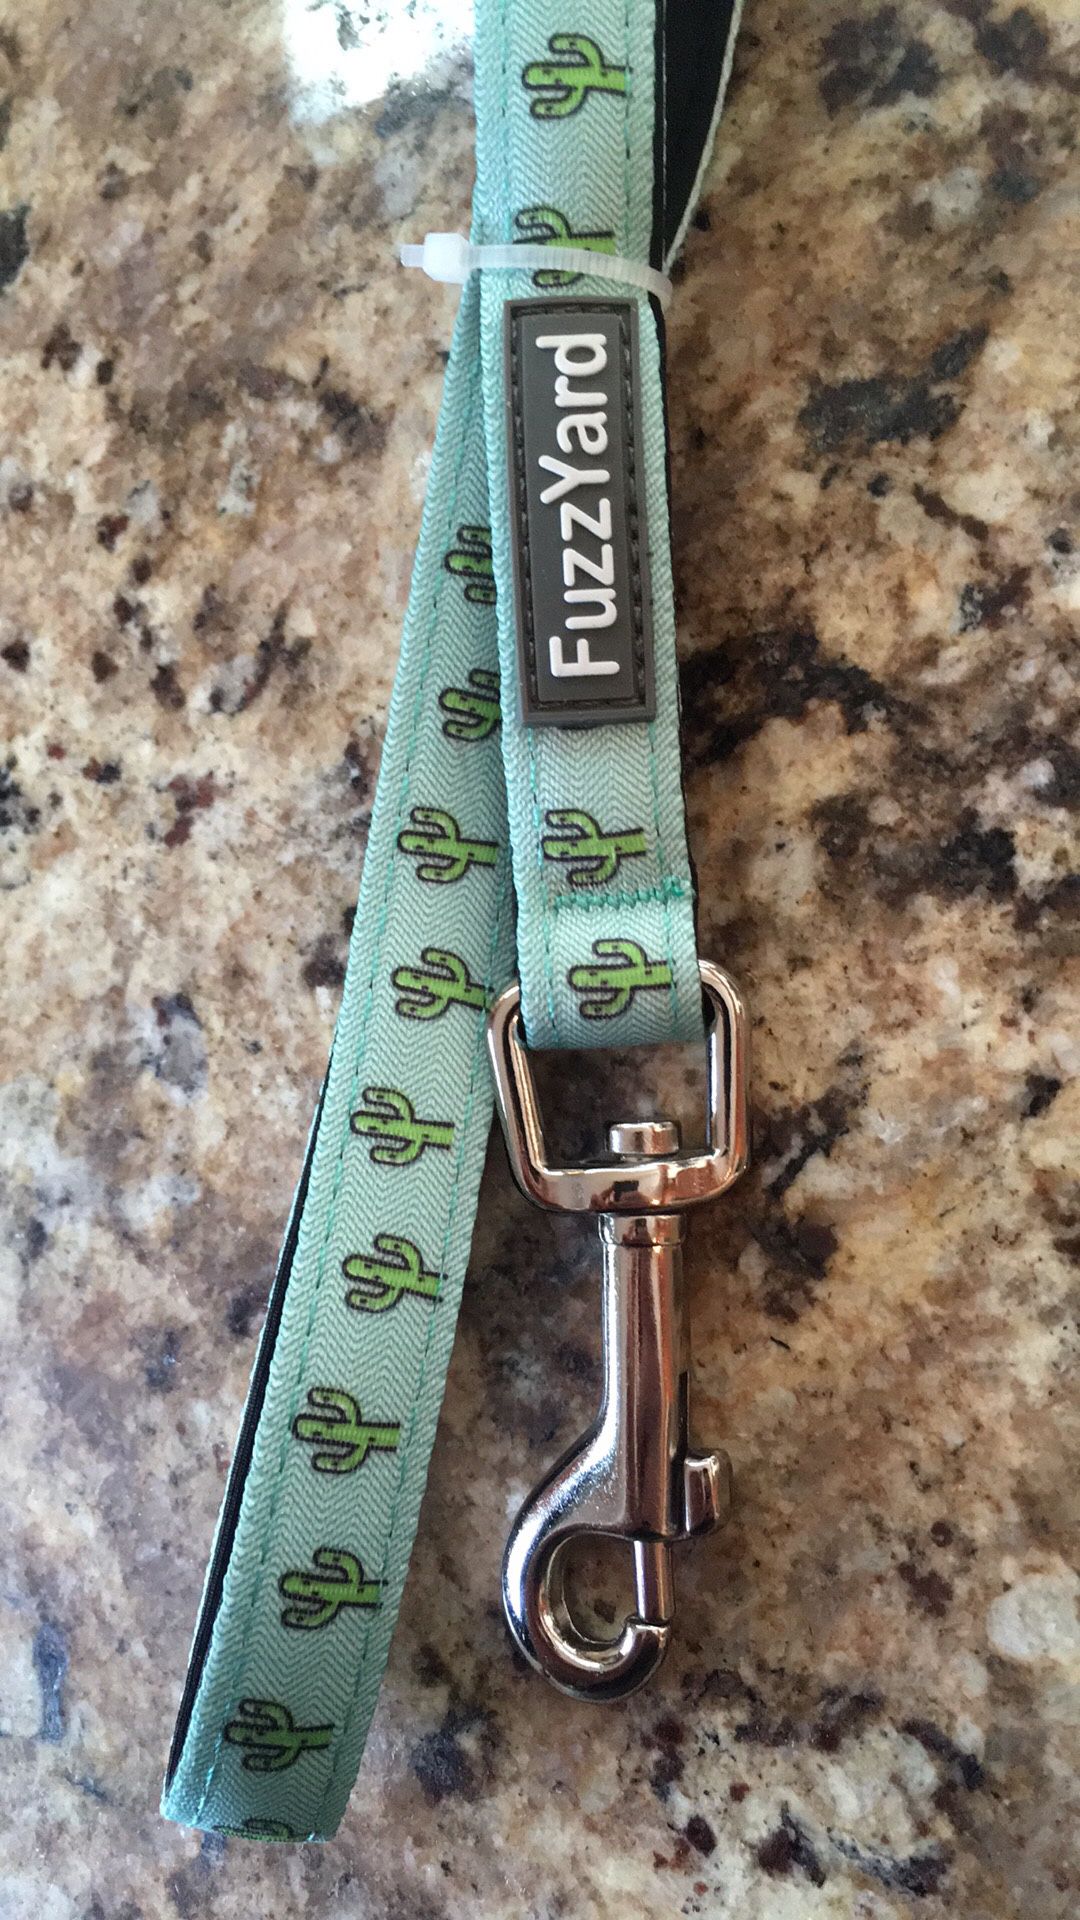 Brand new dog leash and collar set blue with cactus